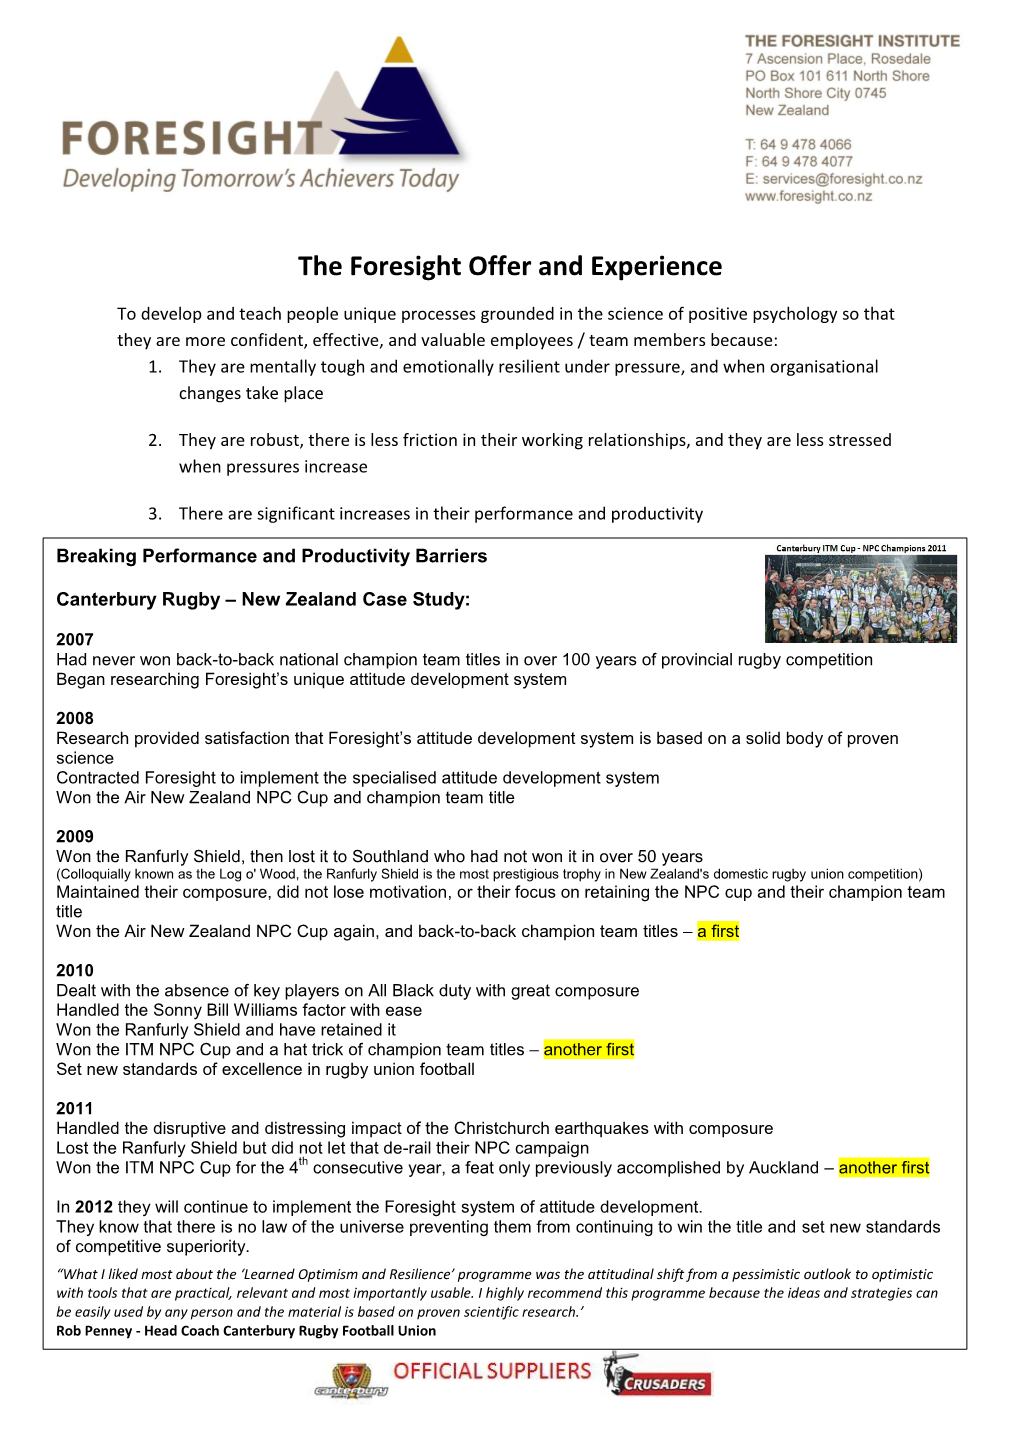 The Foresight Offer and Experience